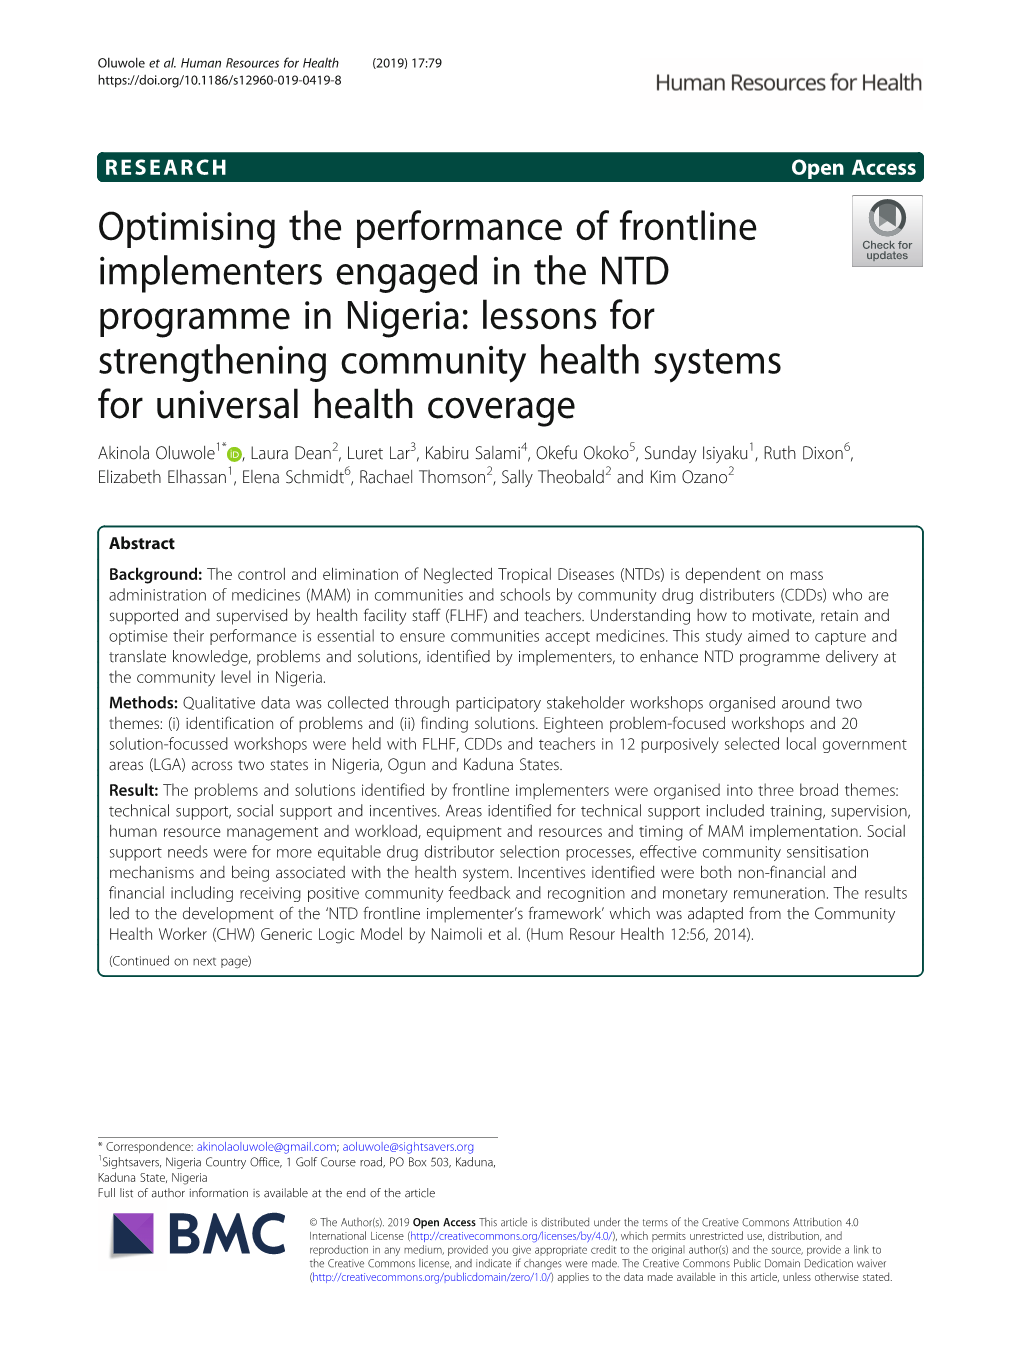 Optimising the Performance of Frontline Implementers Engaged In